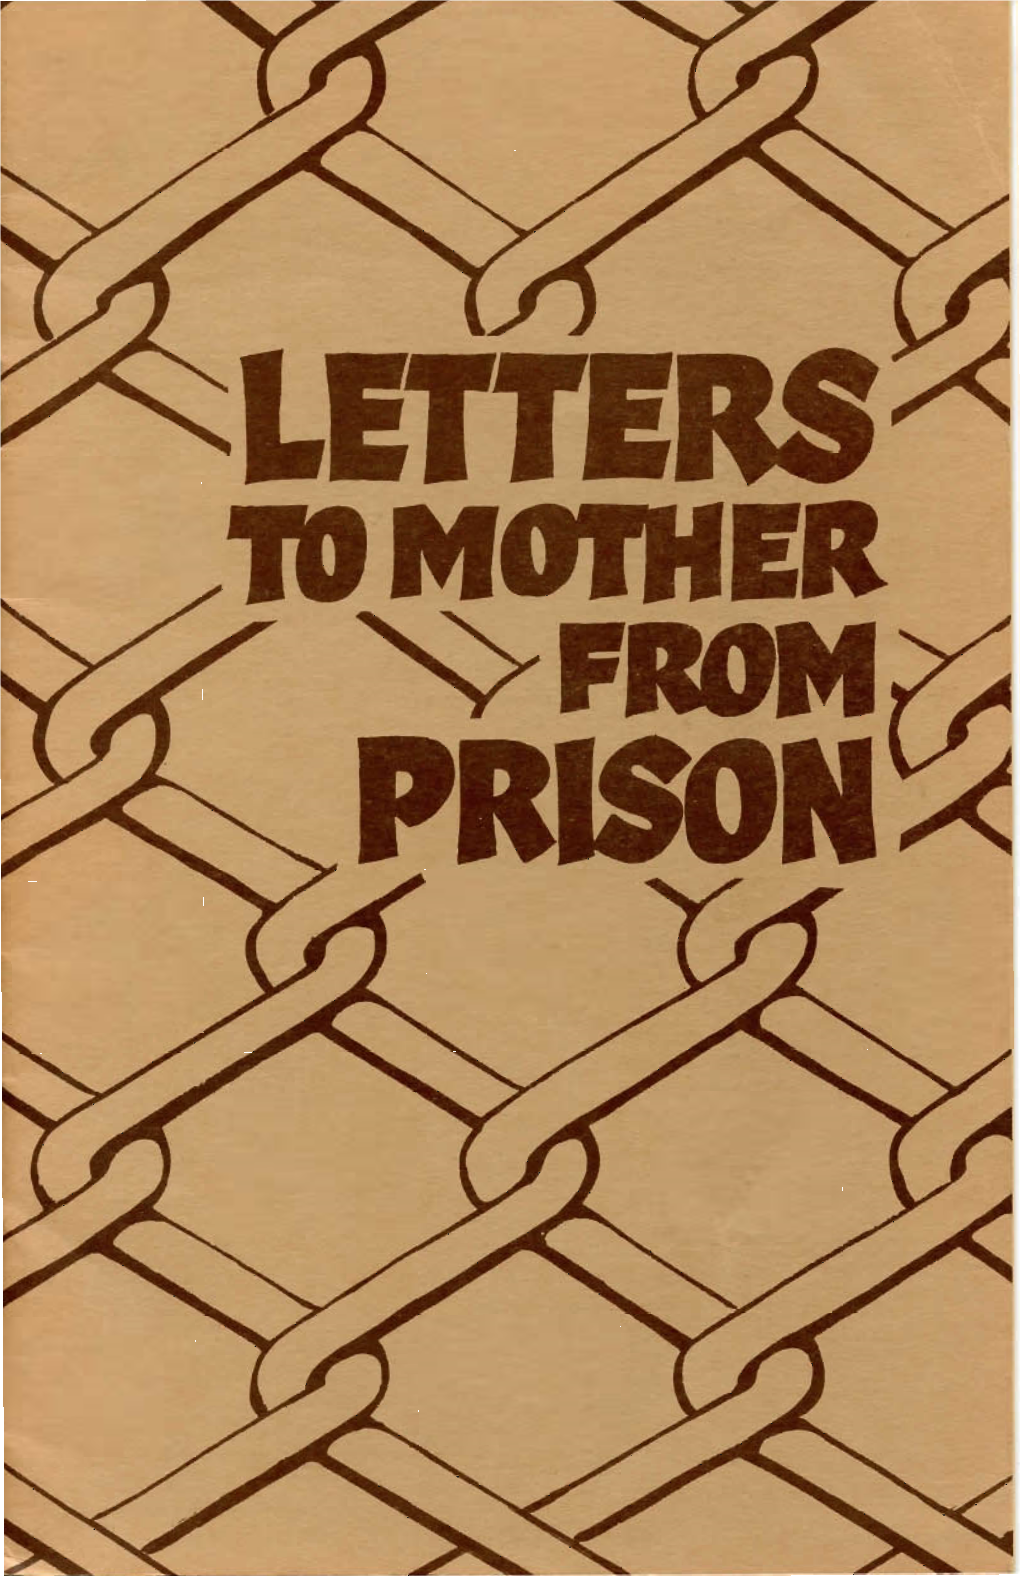 Mother Prisons "Let My People Go"